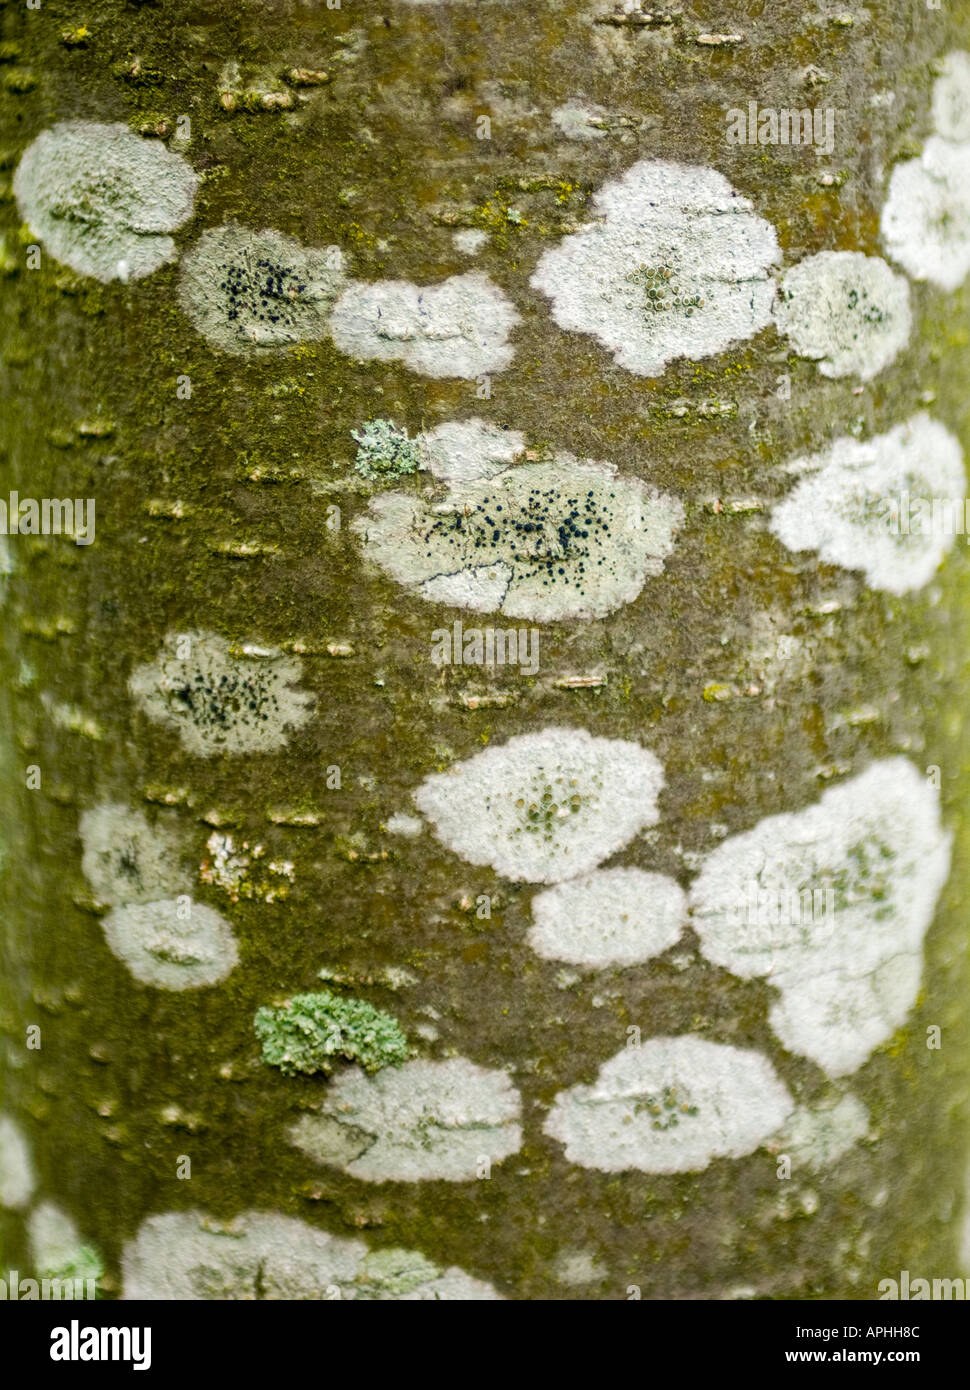 Tree bark close-up with litchen and spores Stock Photo